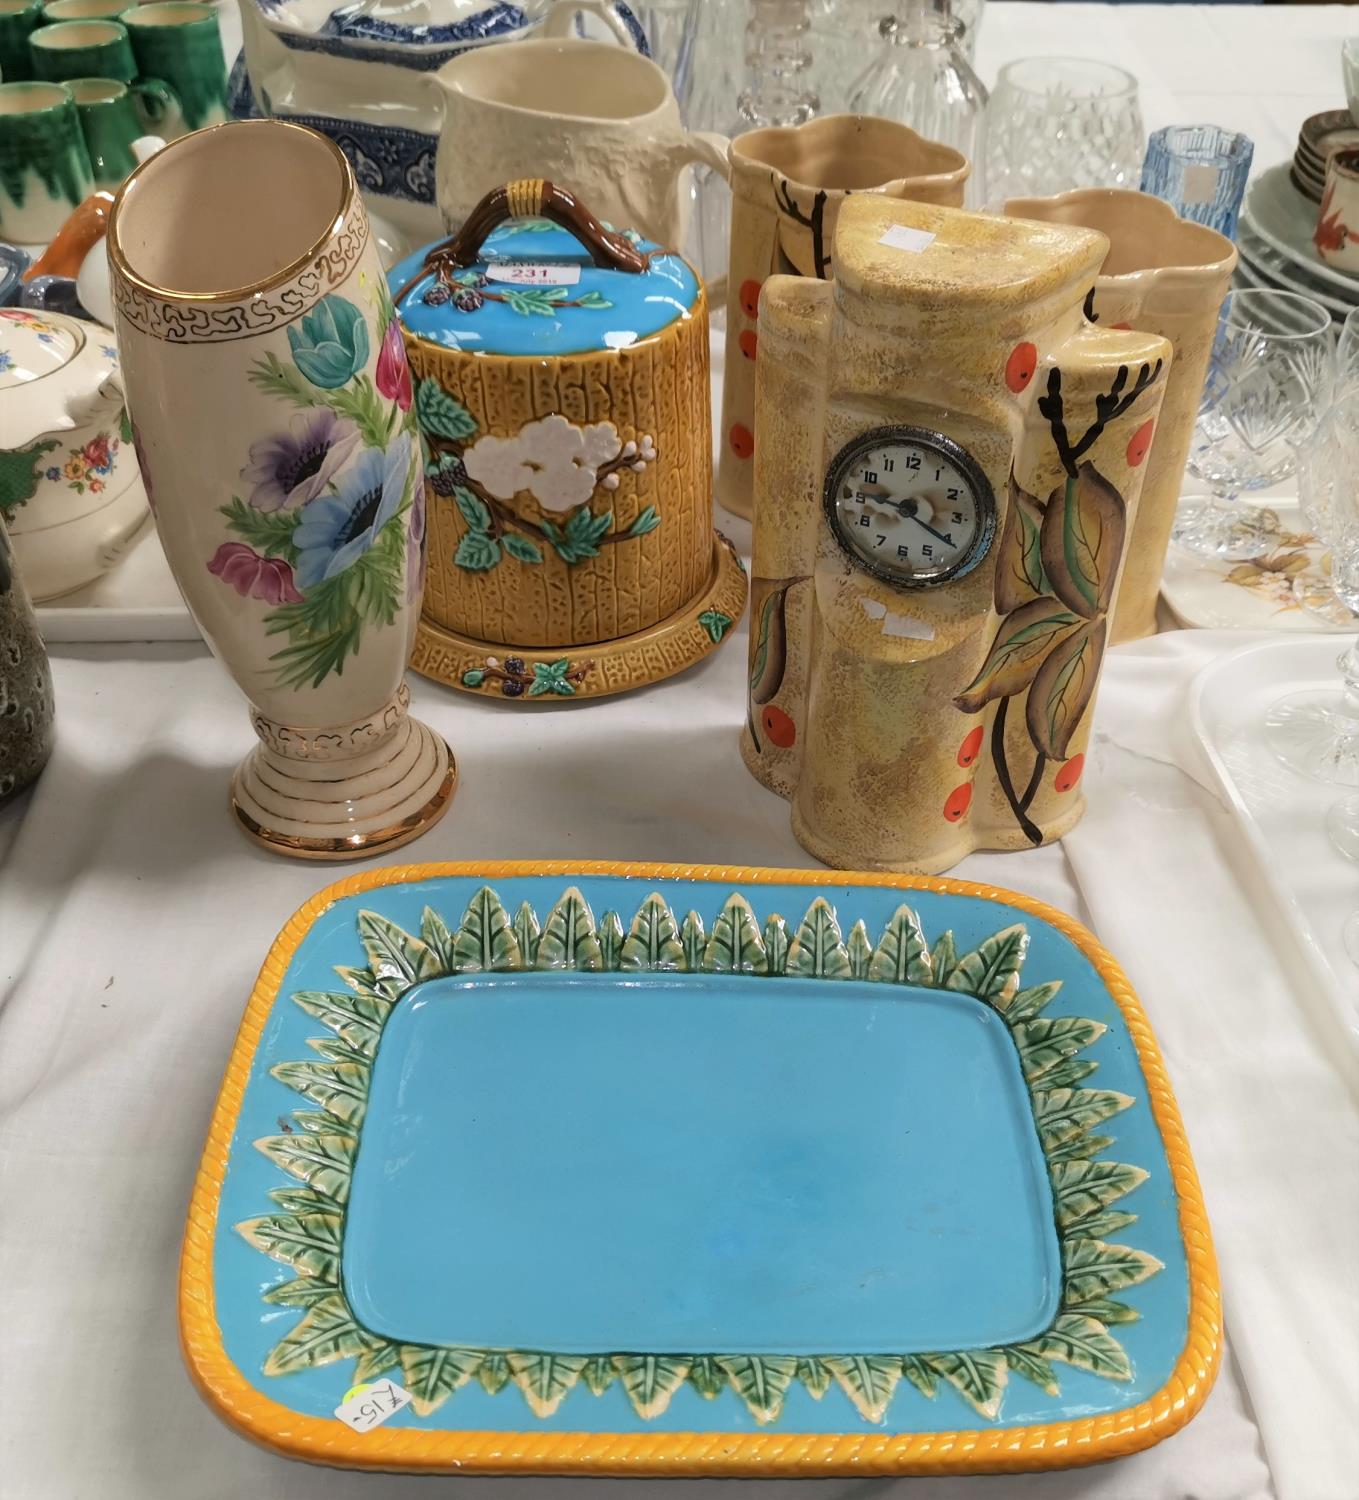 A Minton style majolica cheese dish and platter; an Art Deco pottery clock garniture; a "Tavern in